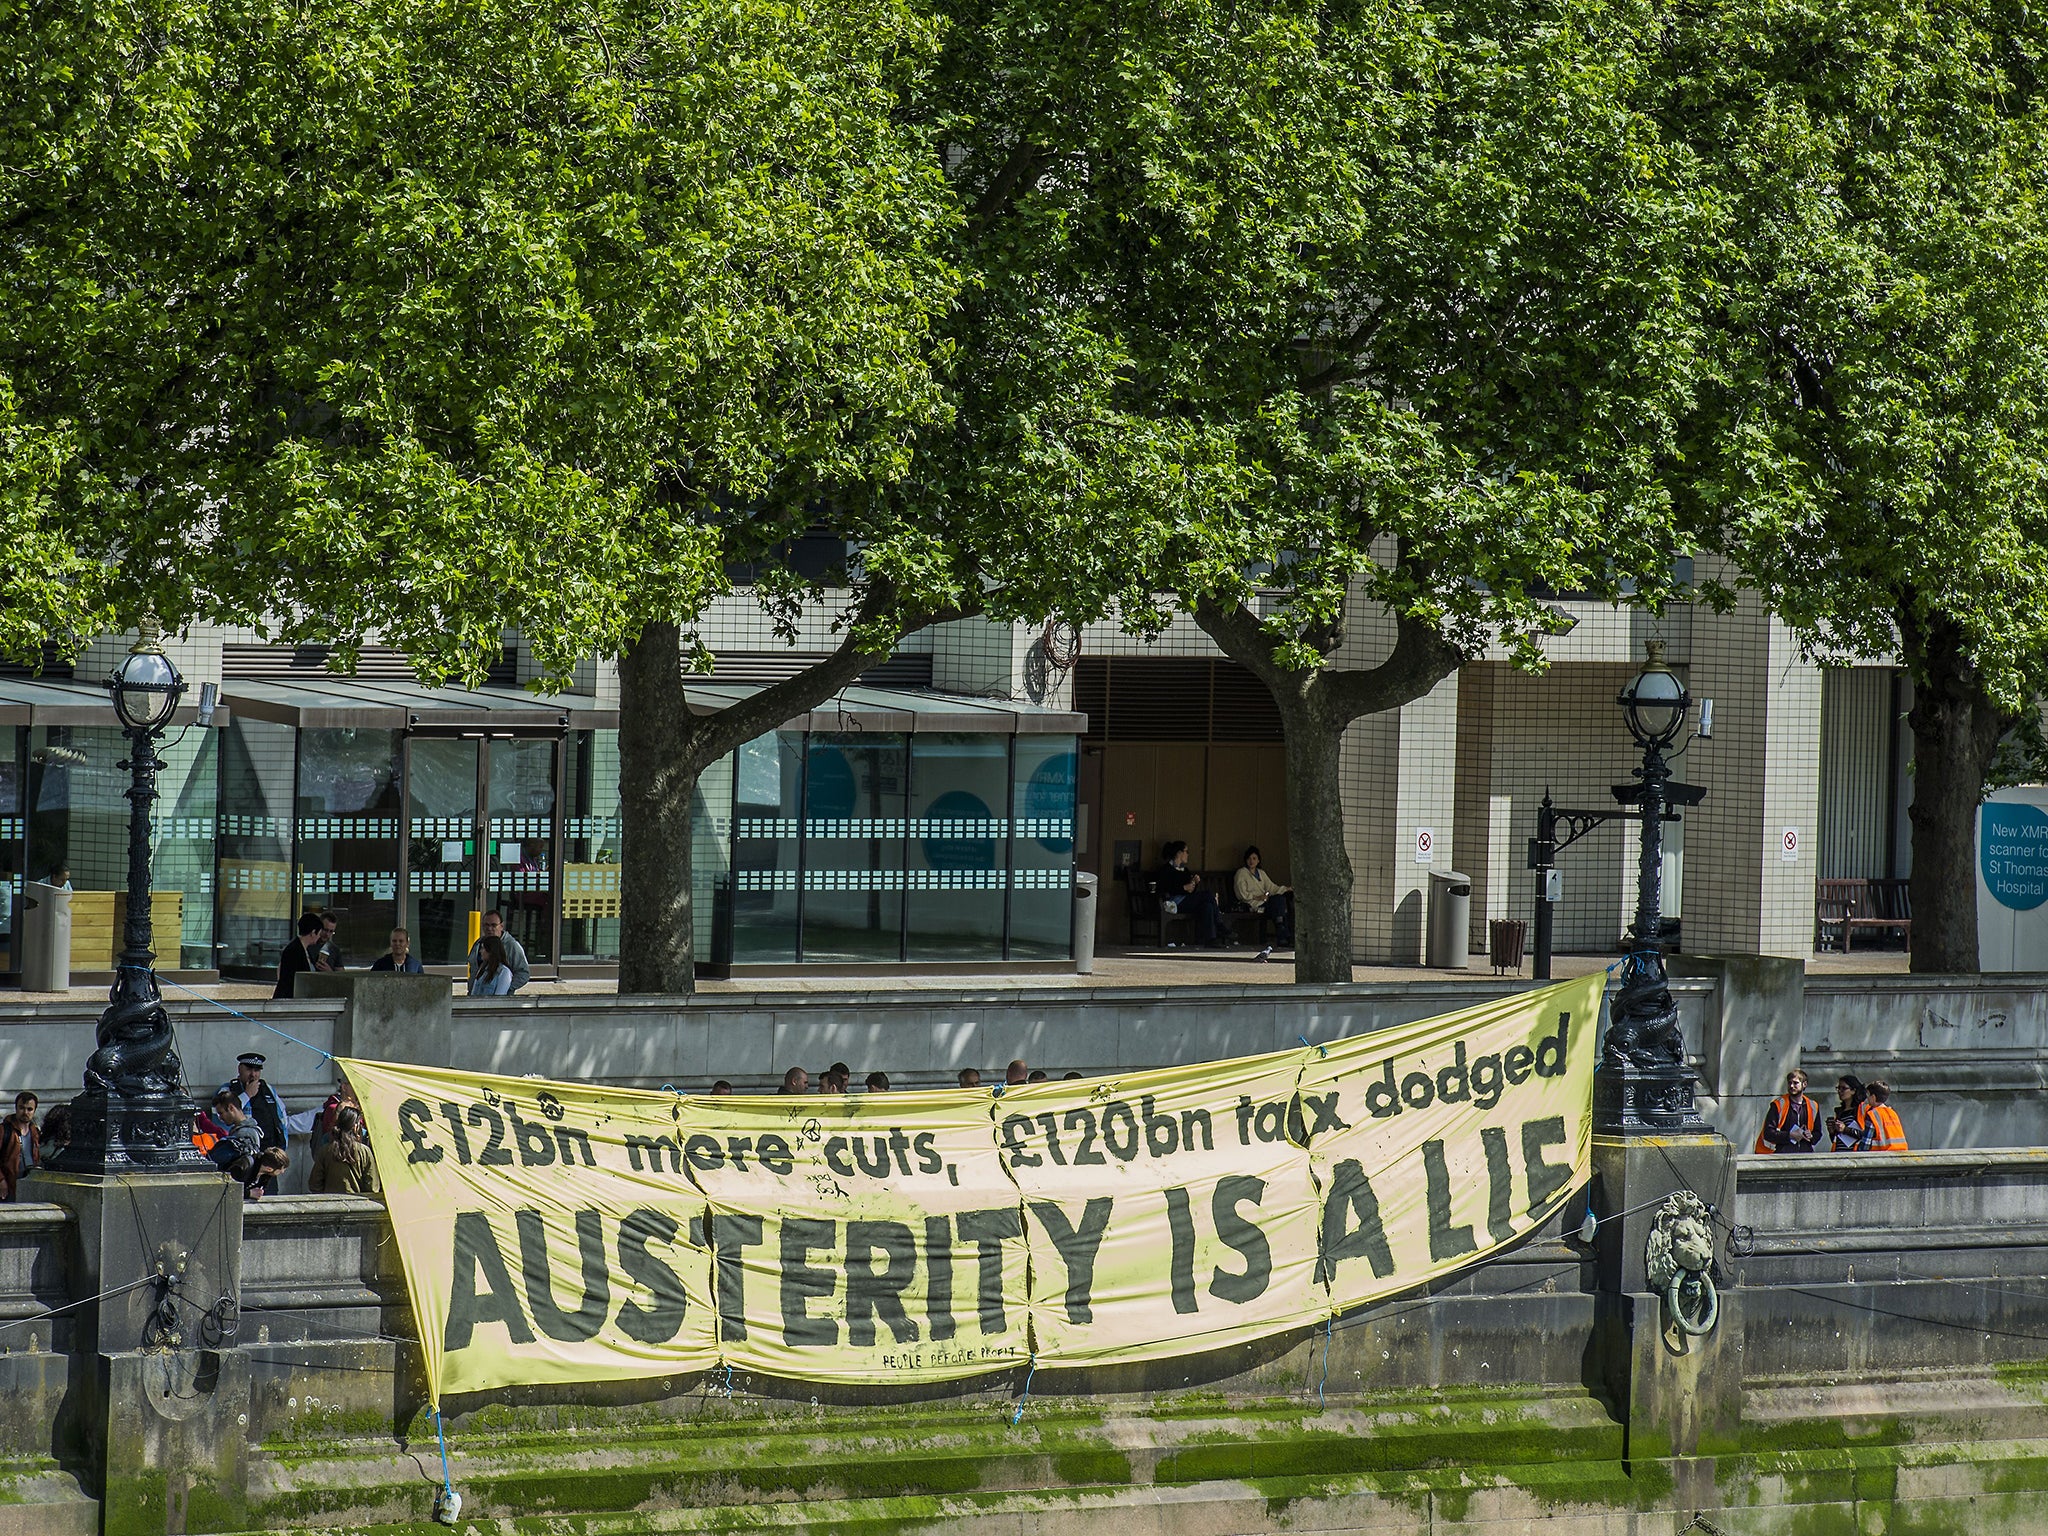 Anti-austerity protesters makes their feelings known during a demonstration in London last year